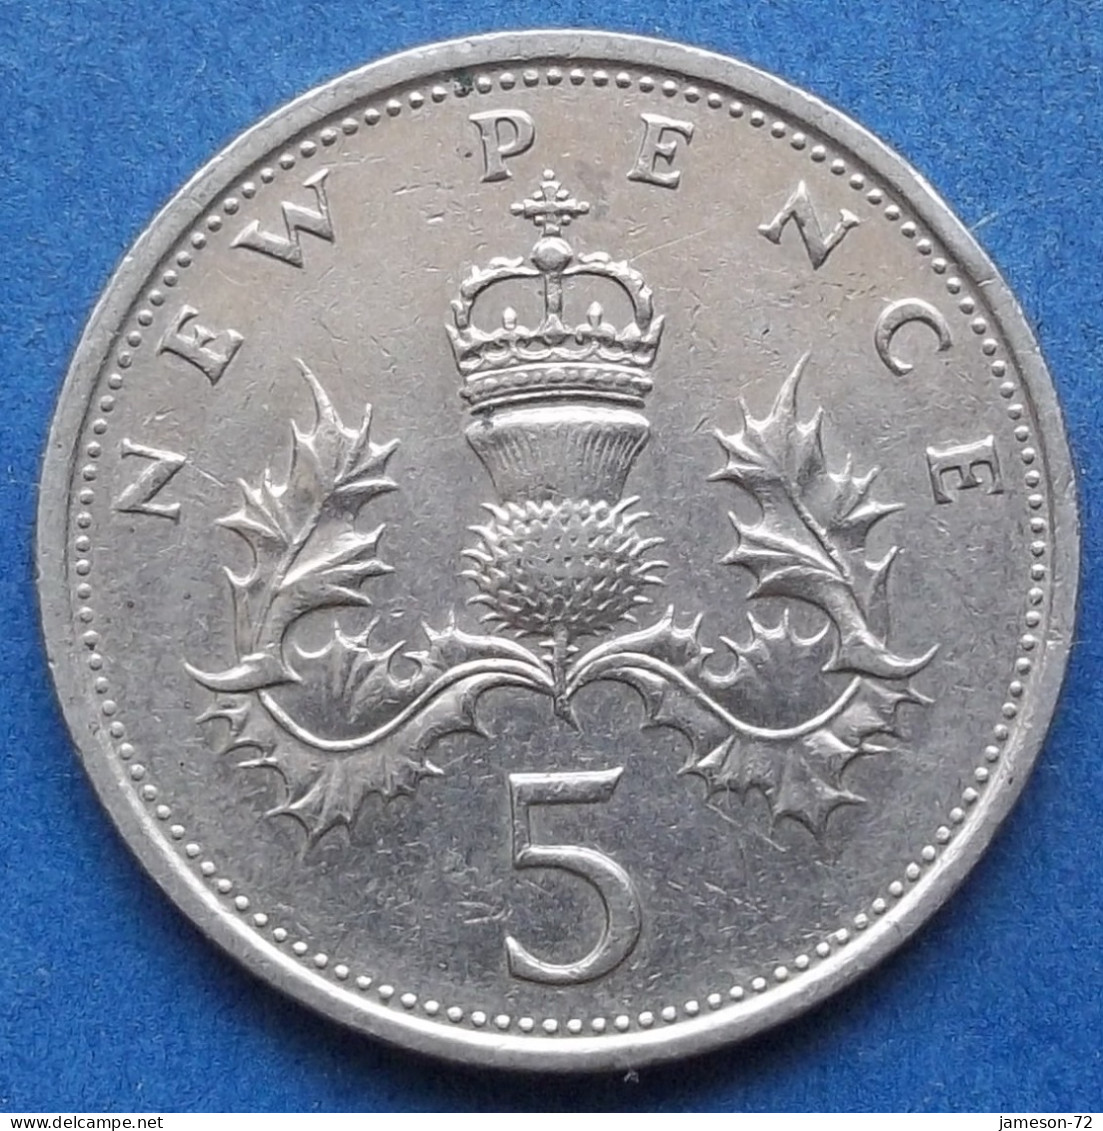 UK - 5 New Pence 1980 "crowned Thistle" KM# 911 Elizabeth II Decimal Coinage (1971-2022) - Edelweiss Coins - 5 Pence & 5 New Pence